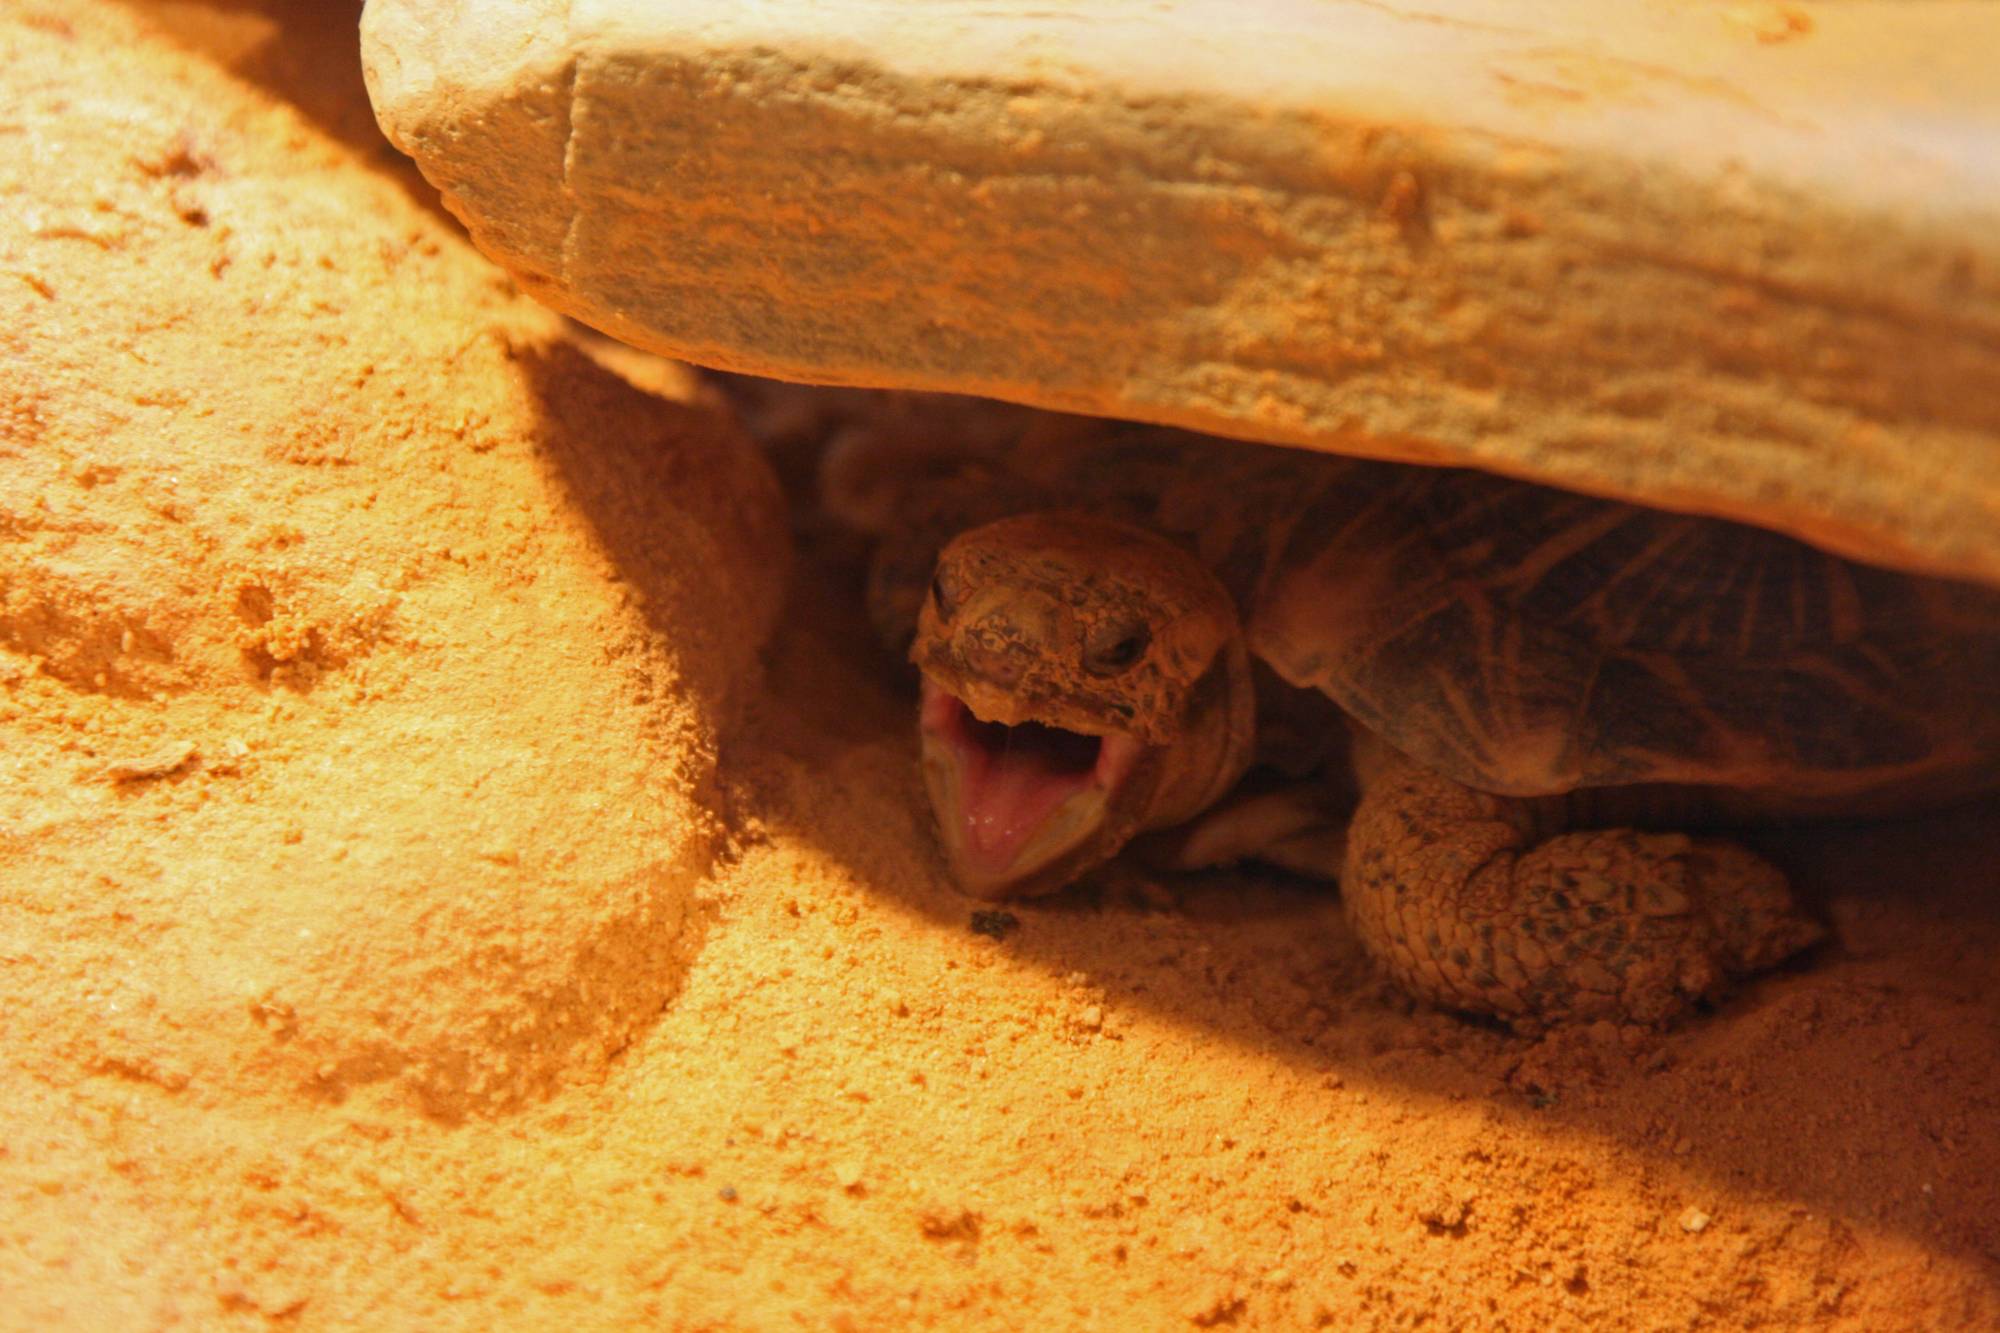 Turtle peeking out from under a rock